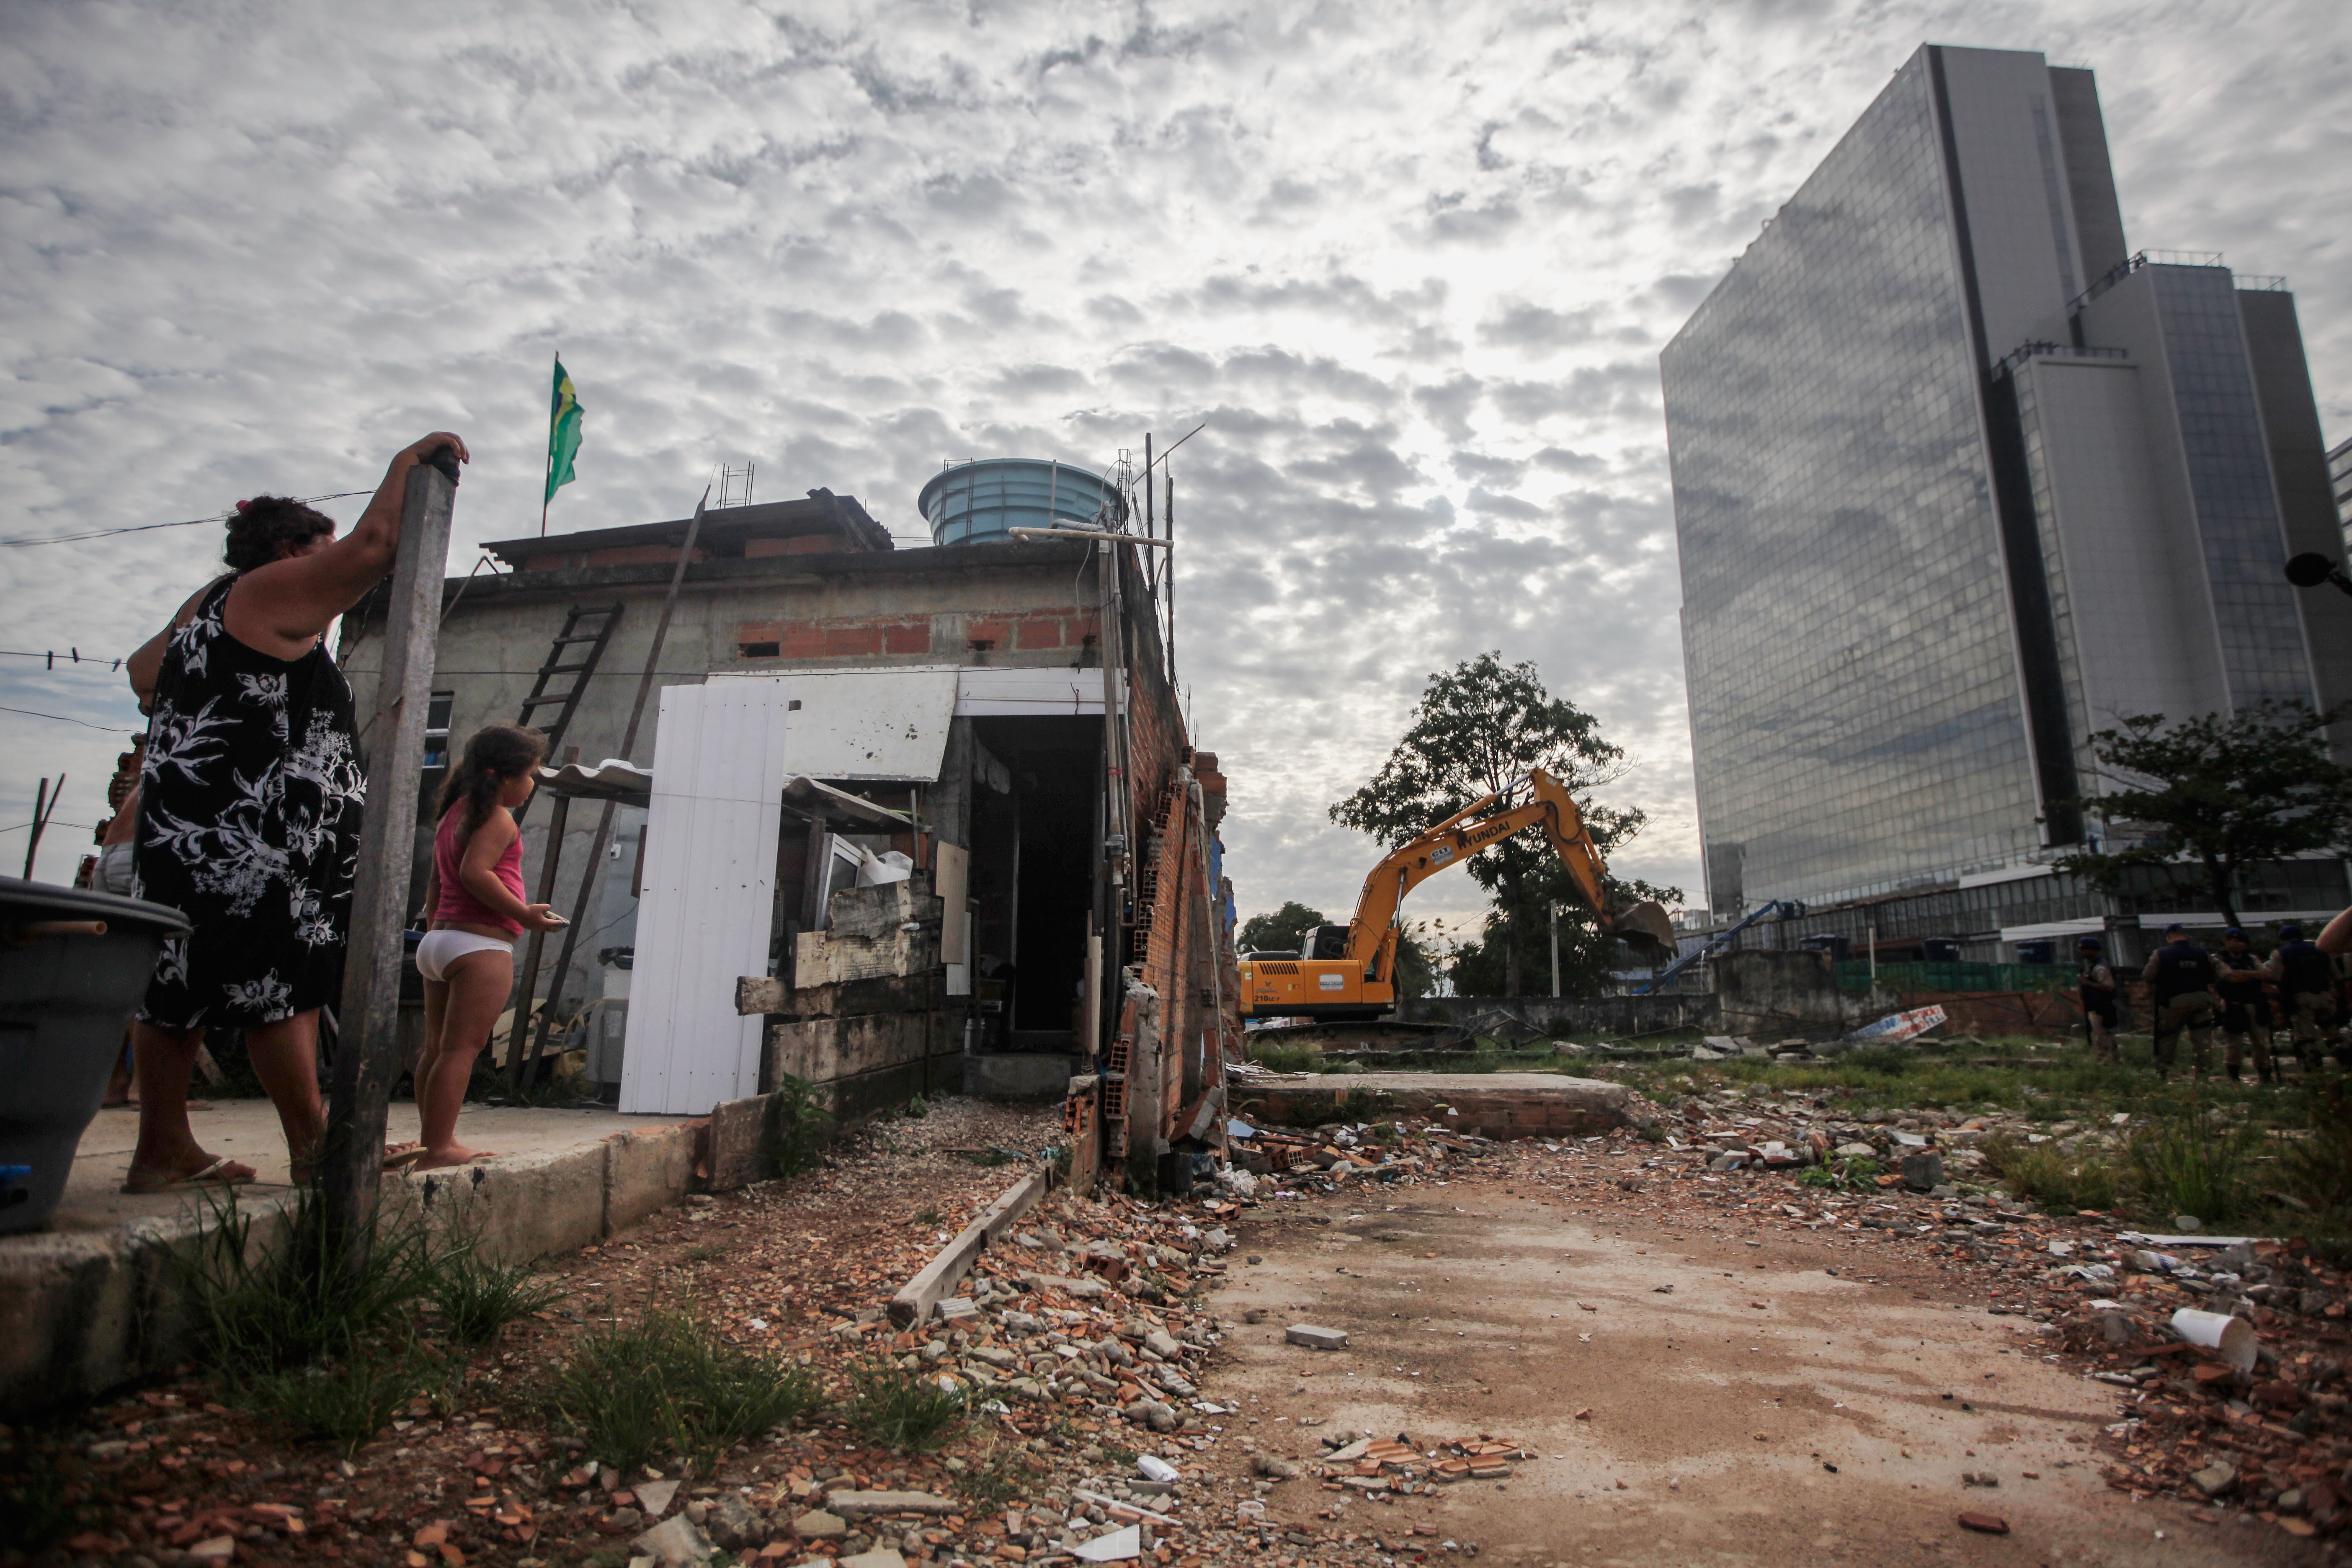 RIO DE JANEIRO, BRAZIL - FEBRUARY 24: Members of the Lopes family watch from their remaining home during the demolition of the neighboring residents association building in the mostly demolished Vila Autodromo favela community, with new Olympic Park construction standing (R), on February 24, 2016 in Rio de Janeiro, Brazil. Most residents of the favela community have moved out and had their properties demolished after receiving compensation for their homes which are located directly adjacent to the Olympic Park under construction for the Rio 2016 Olympic Games. A small fraction of remaining families from an original 700 or so in Vila Autodromo are resisting the controversial evictions and remain in the community. The favela sprang from an old fishing community and was considered one of the city's safest. Removals and demolitions have occurred in other Rio communities with tangential links to the games. (Photo by Mario Tama/Getty Images)